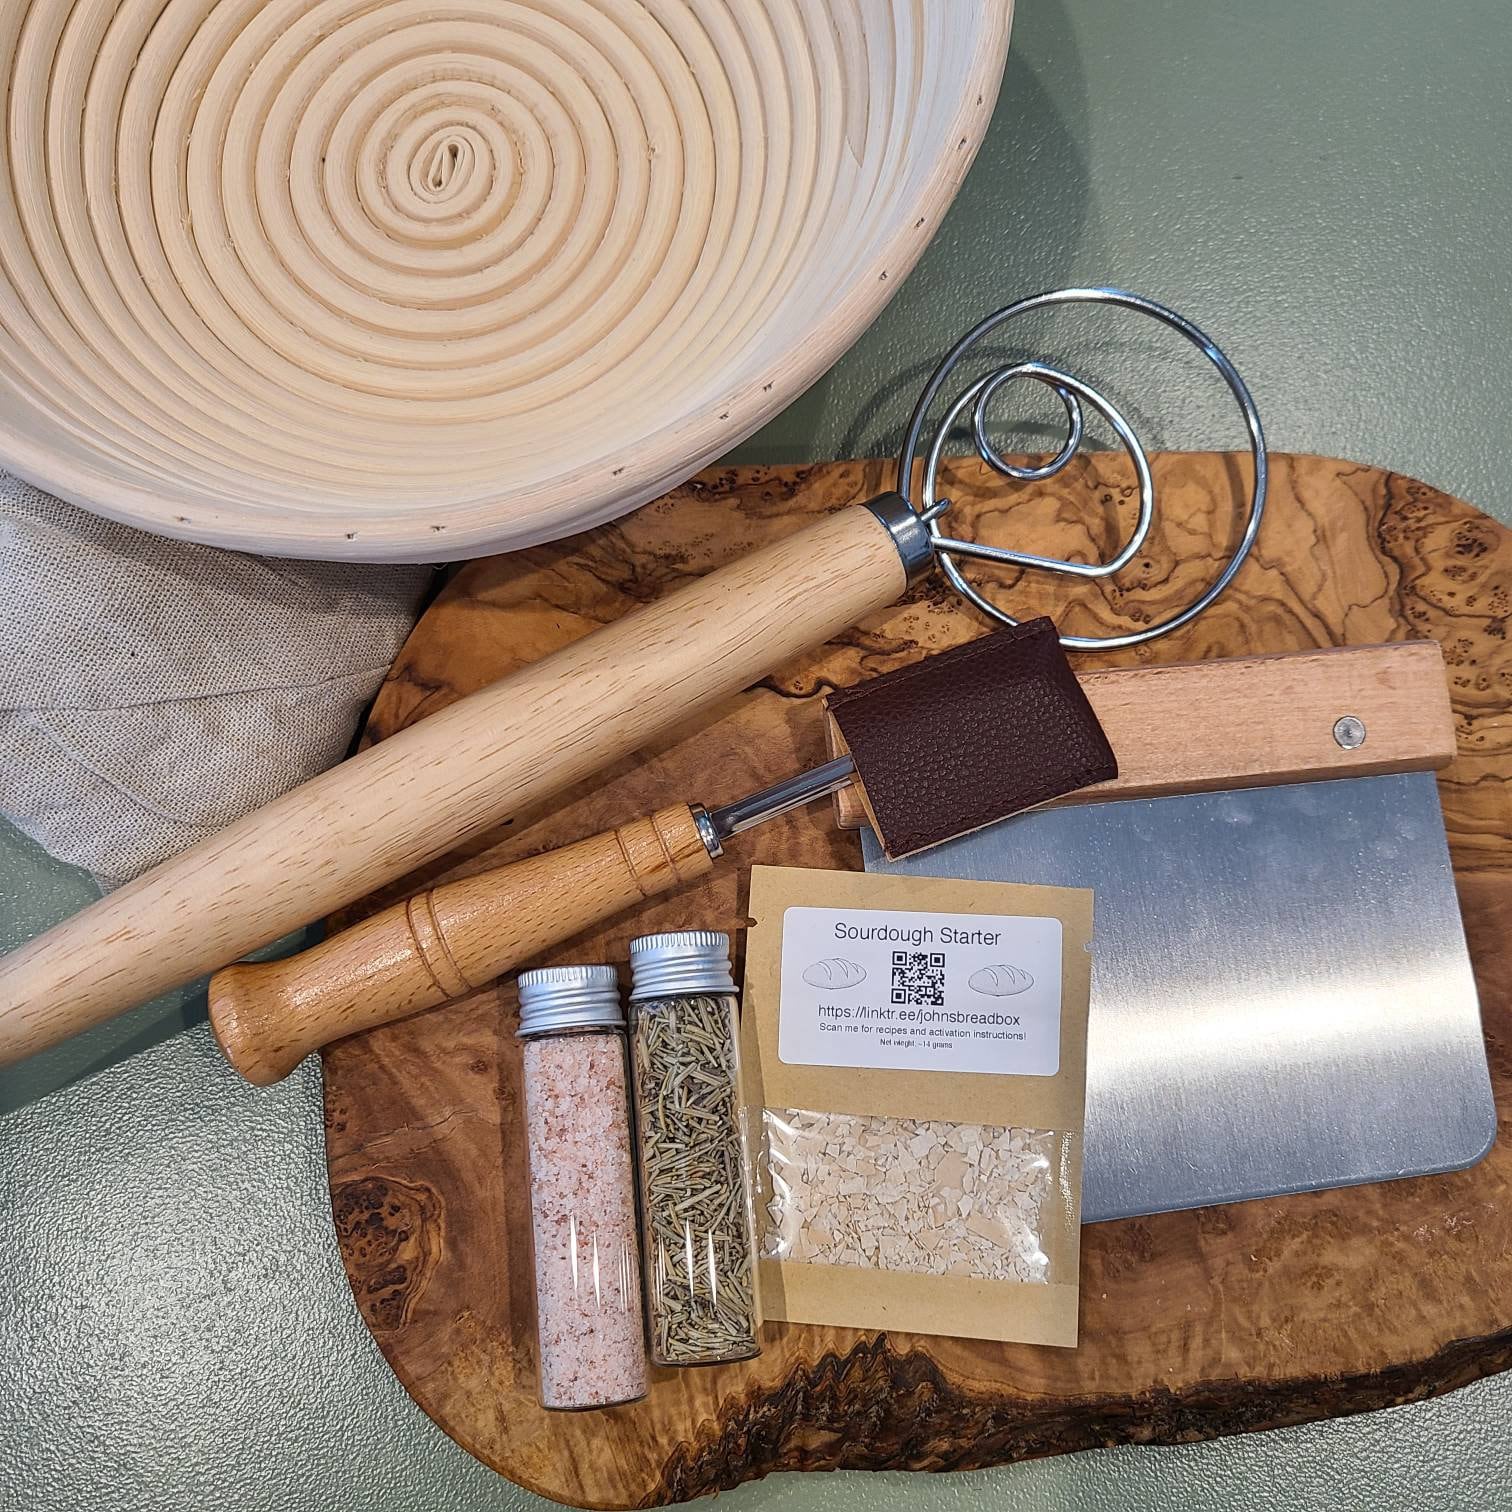 The 14 Breadmaking Tools You Need to Make Better Homemade Loaves